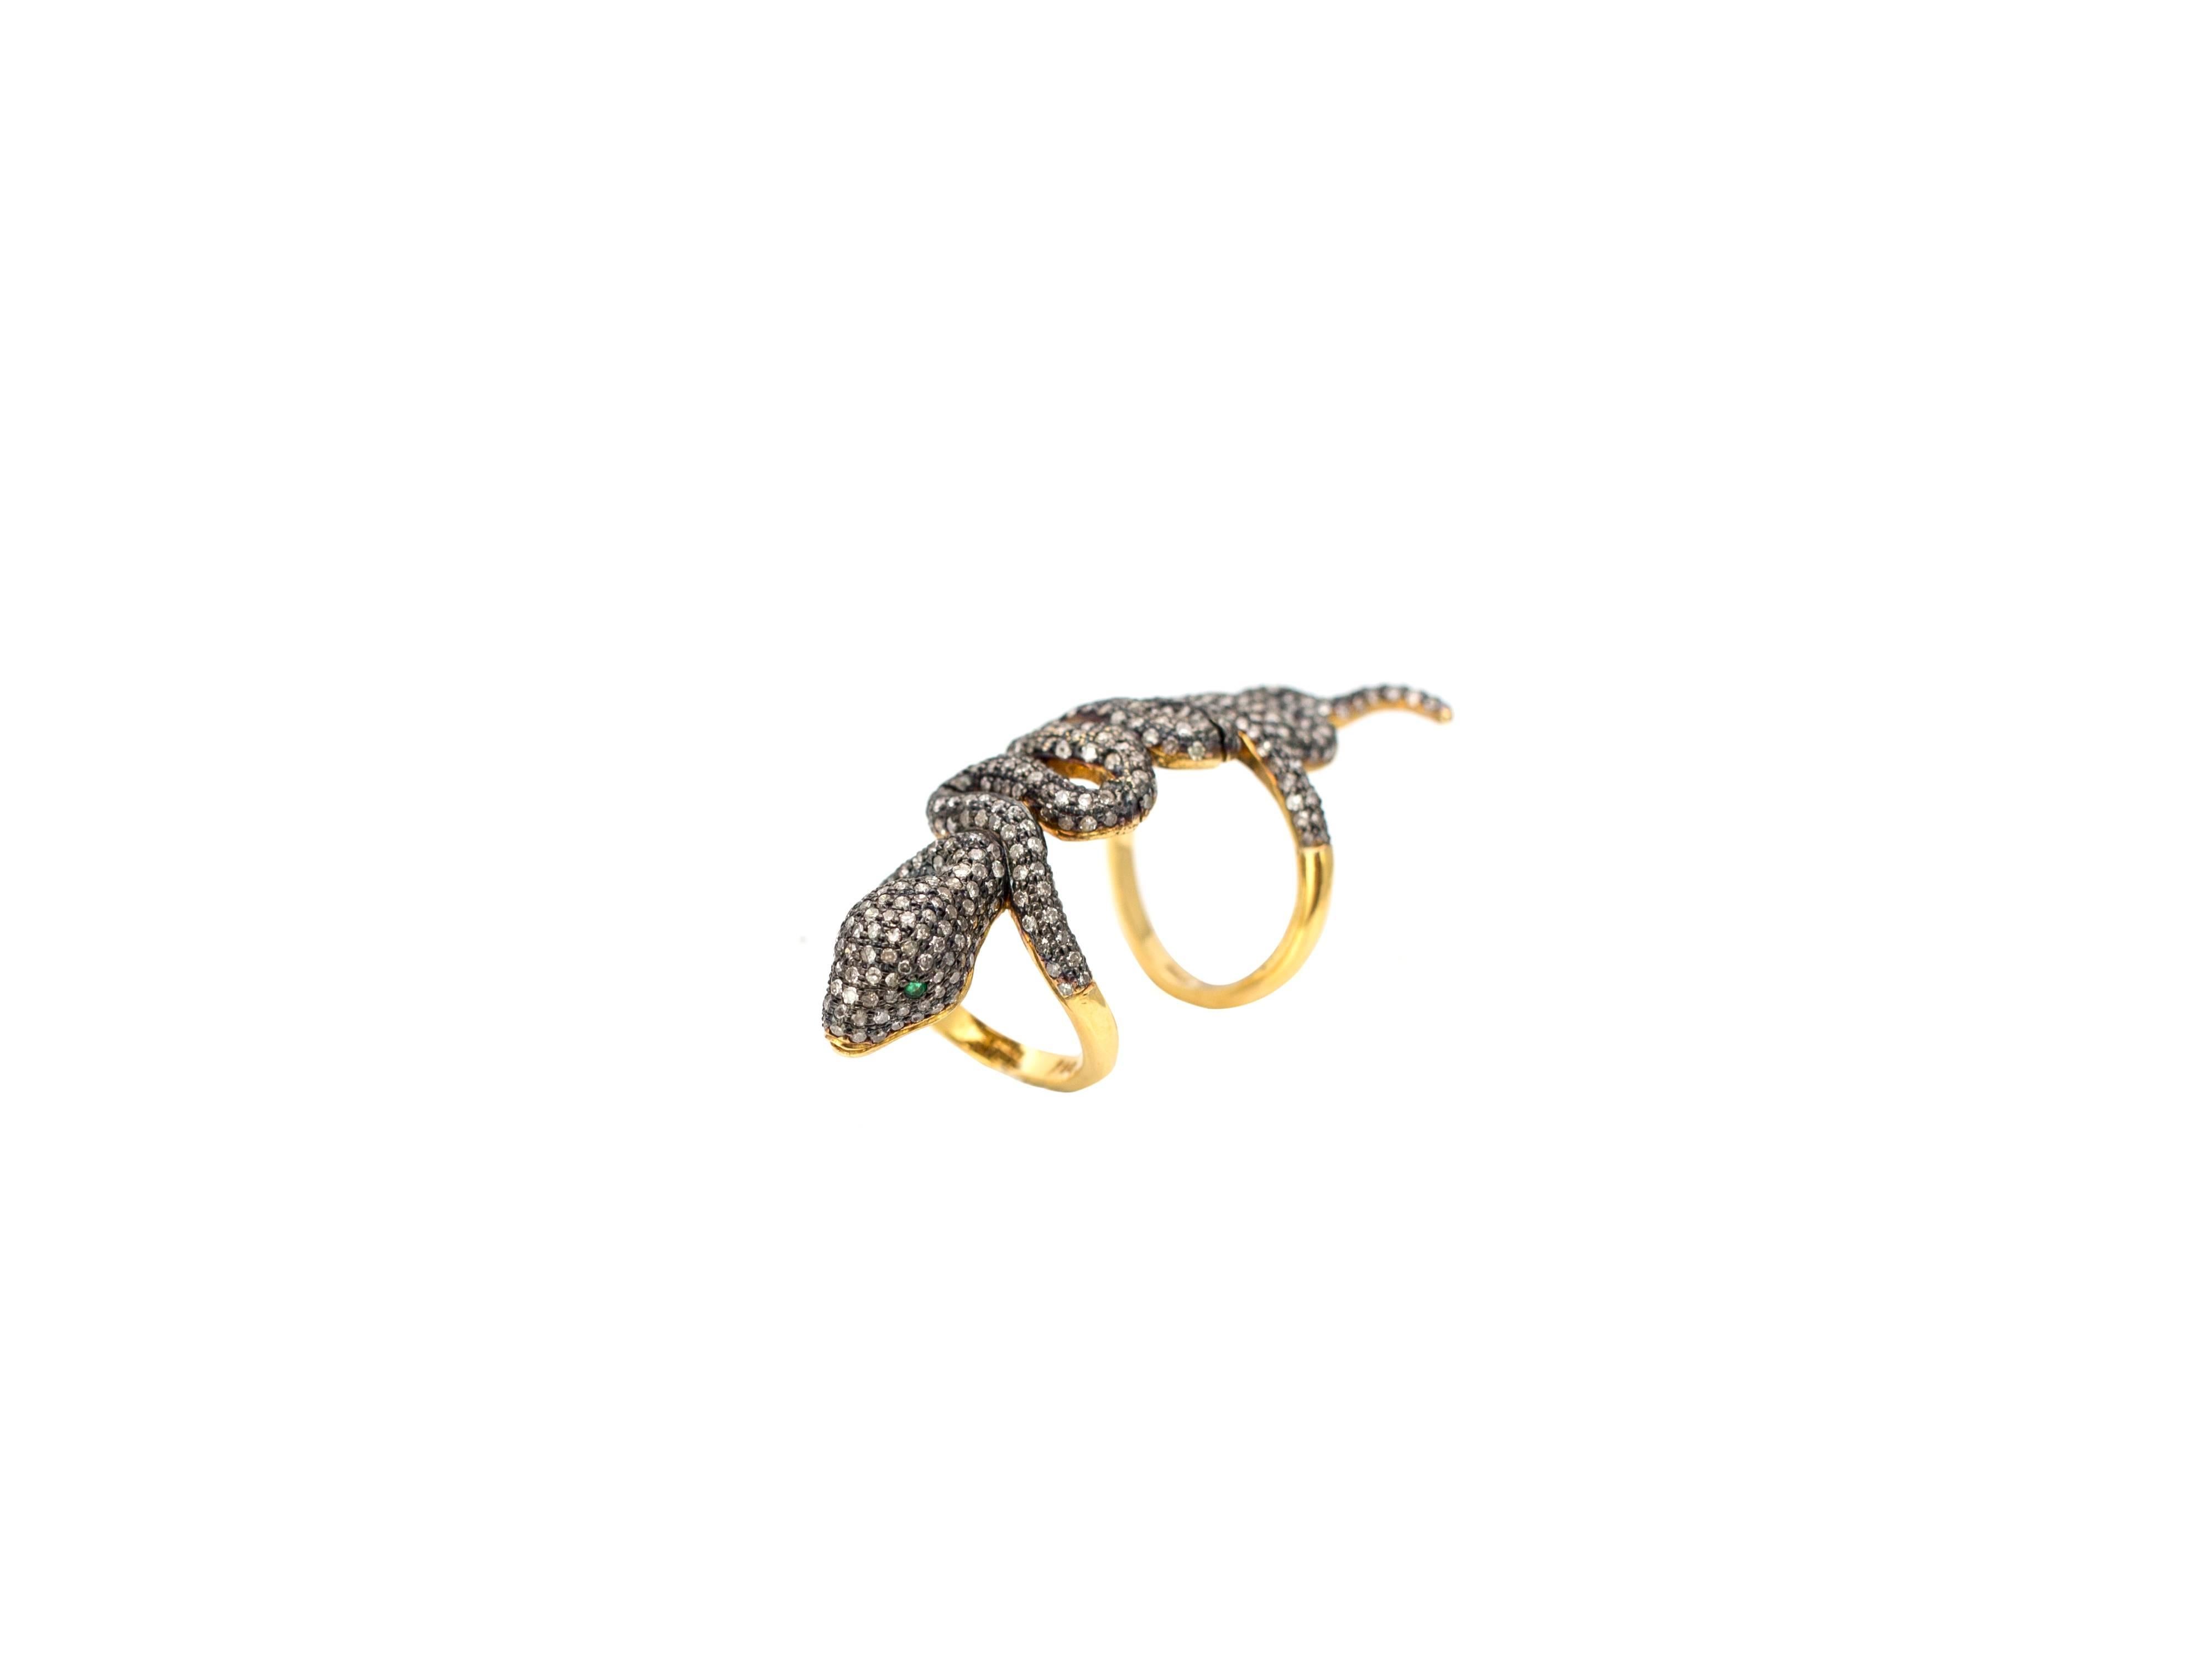 Over the knuckle snake ring by designer Samira13 features 4.5 carats of champagne diamonds set in vermeil silver. Ring size 7.